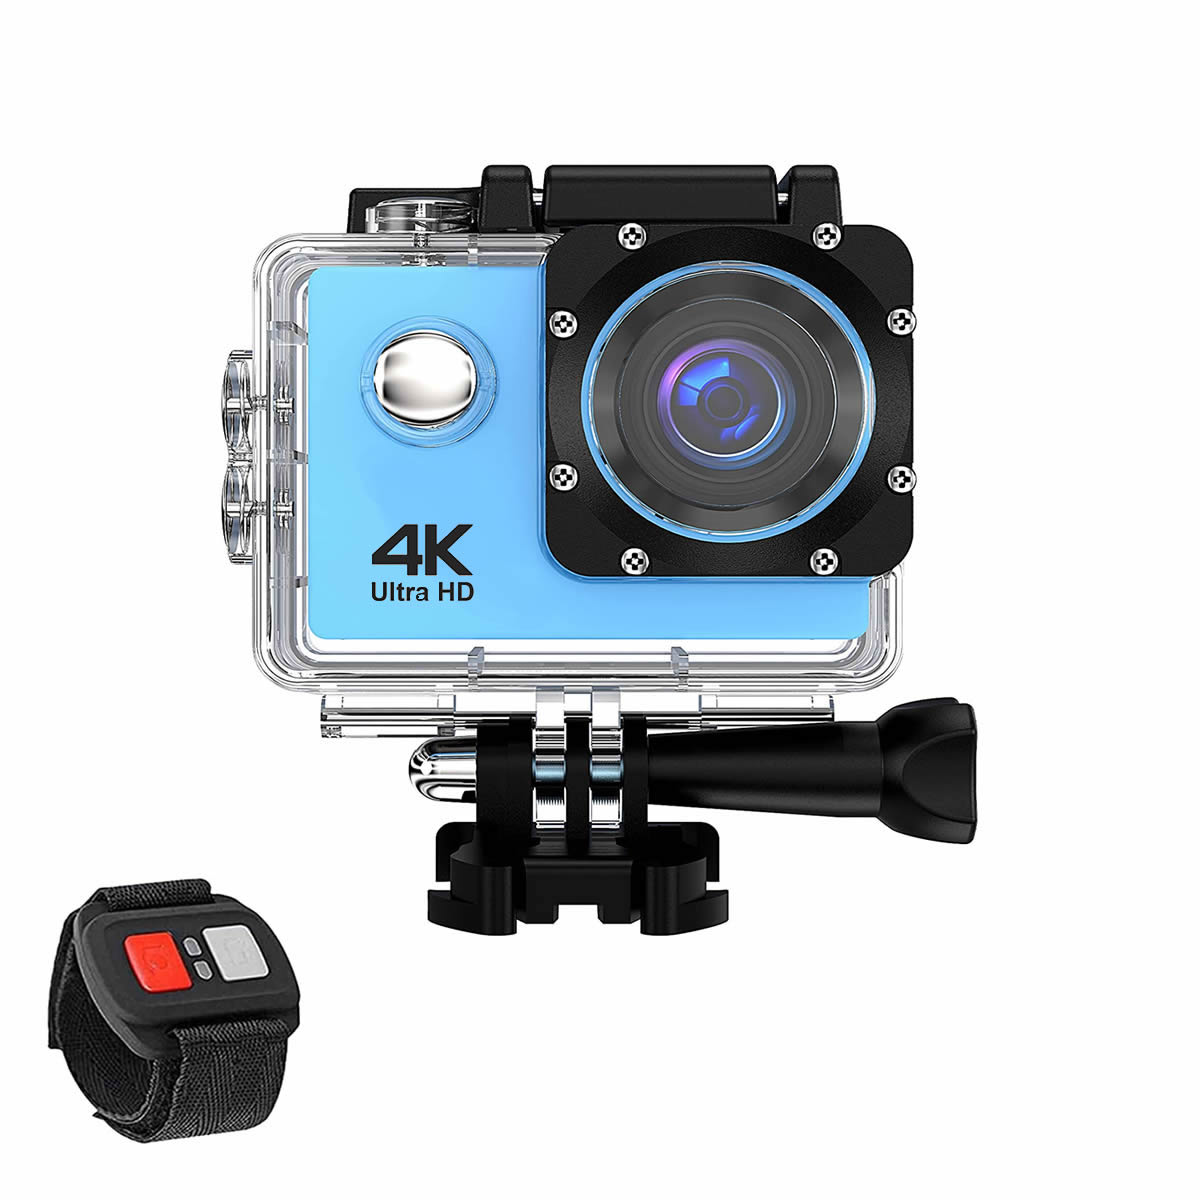 4K  Waterproof All Digital UHD WiFi Camera + RF Remote And Accessories - 26963814_large_71eaef21-c32e-460d-a494-765cc9c15a08